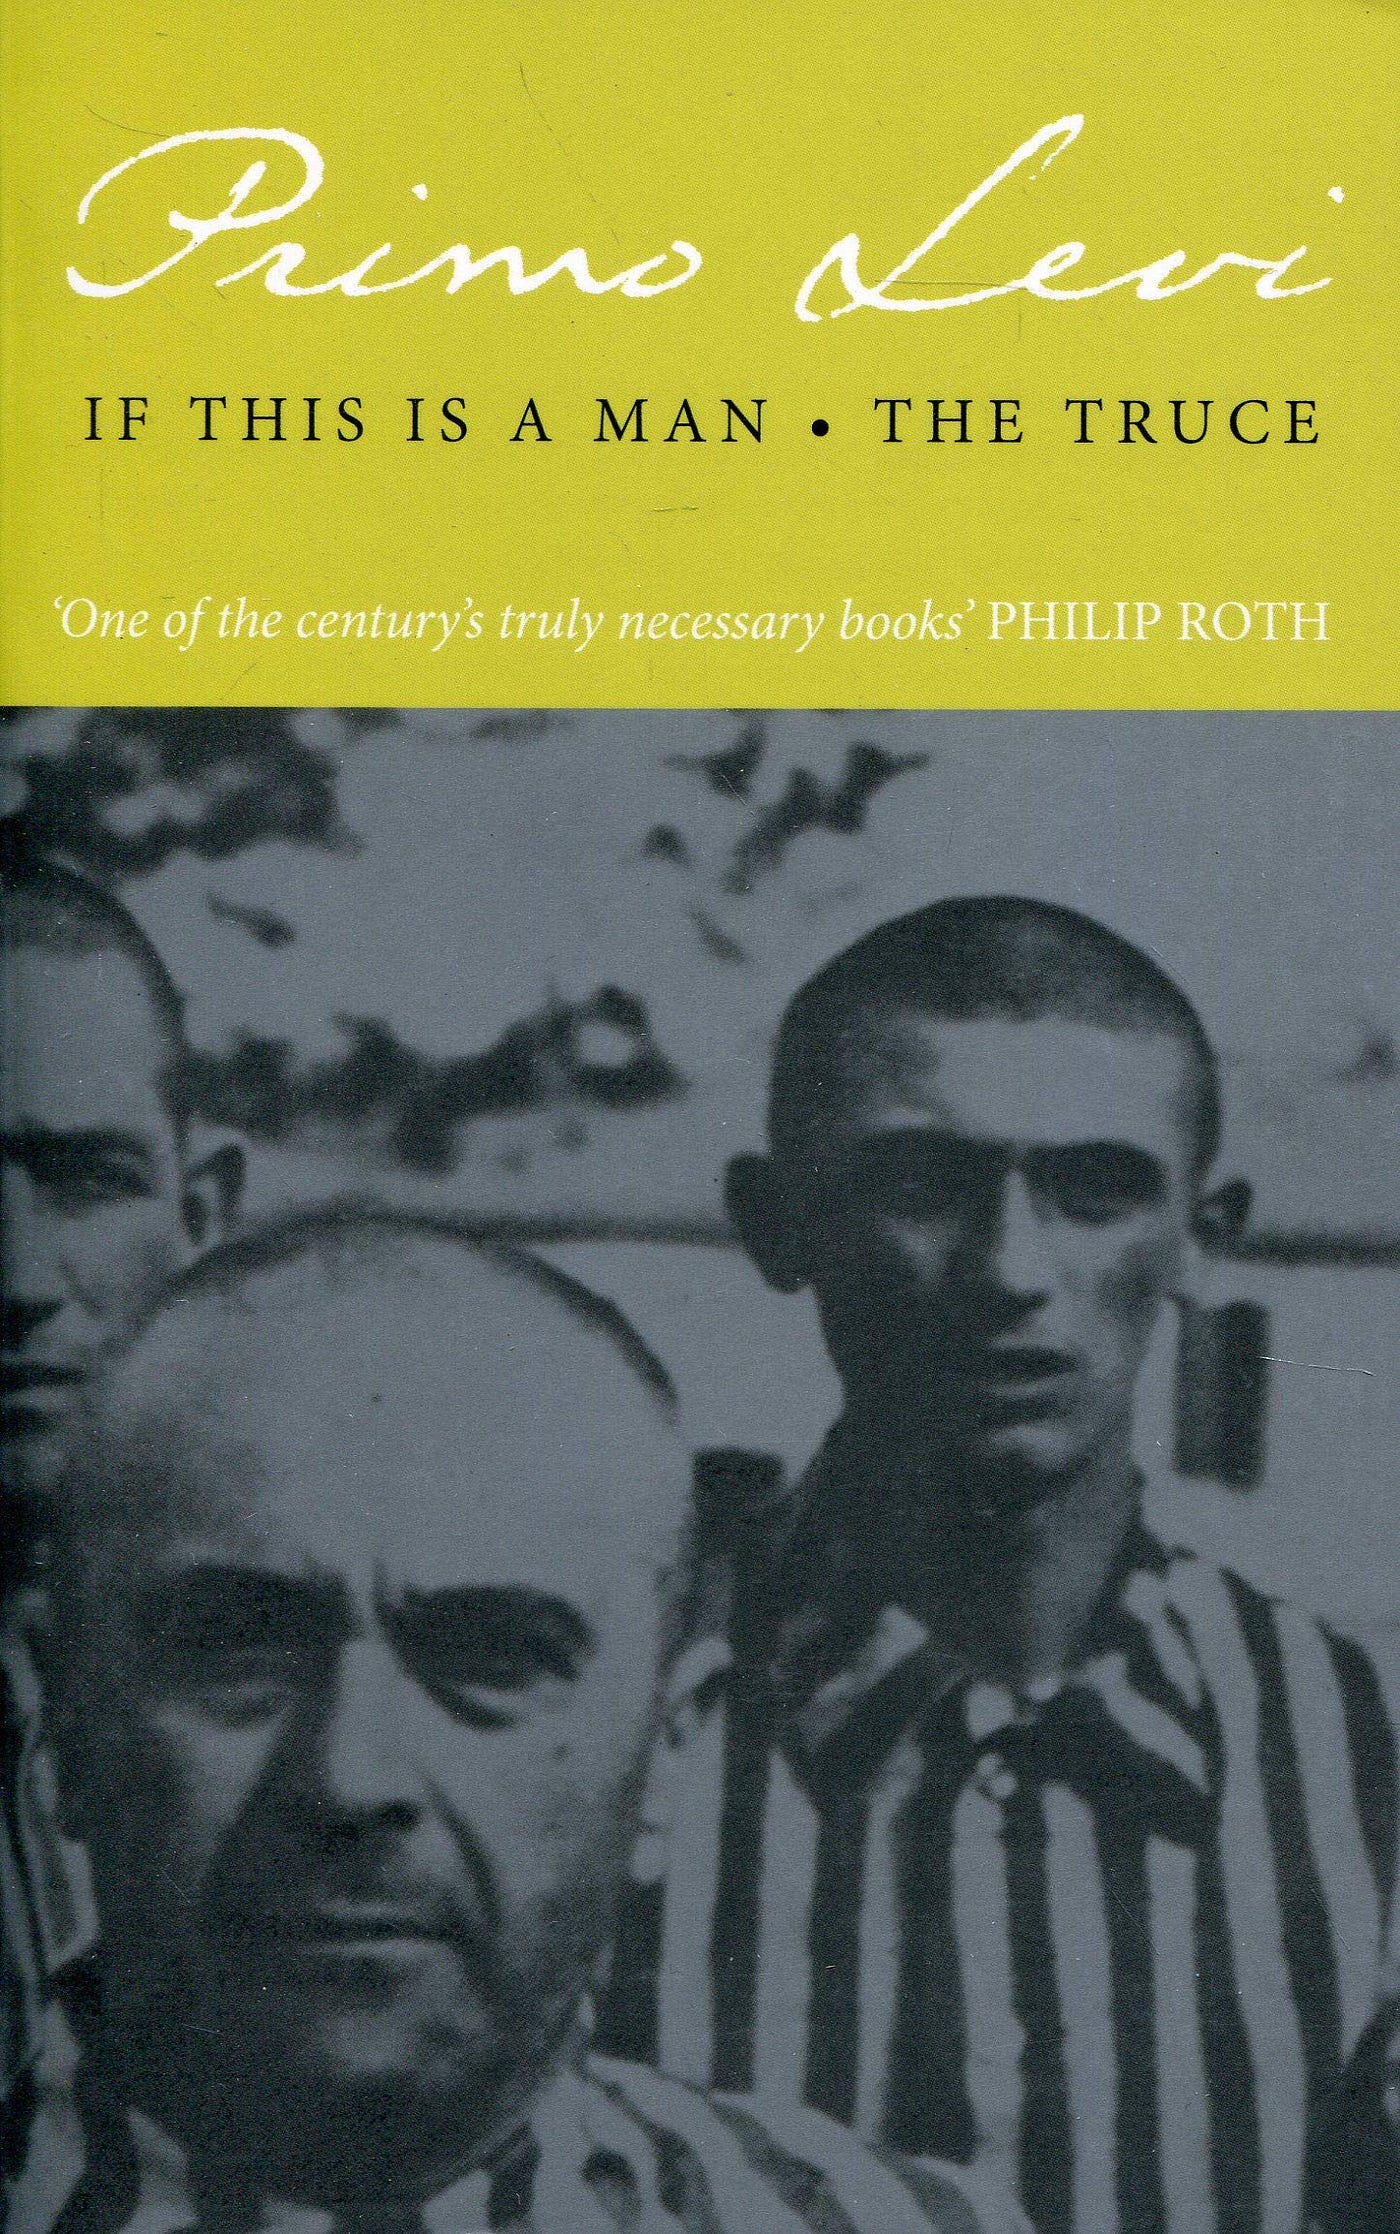 If This Is a Man by Primo Levi — A Review | by Yannick Ondoa | Medium